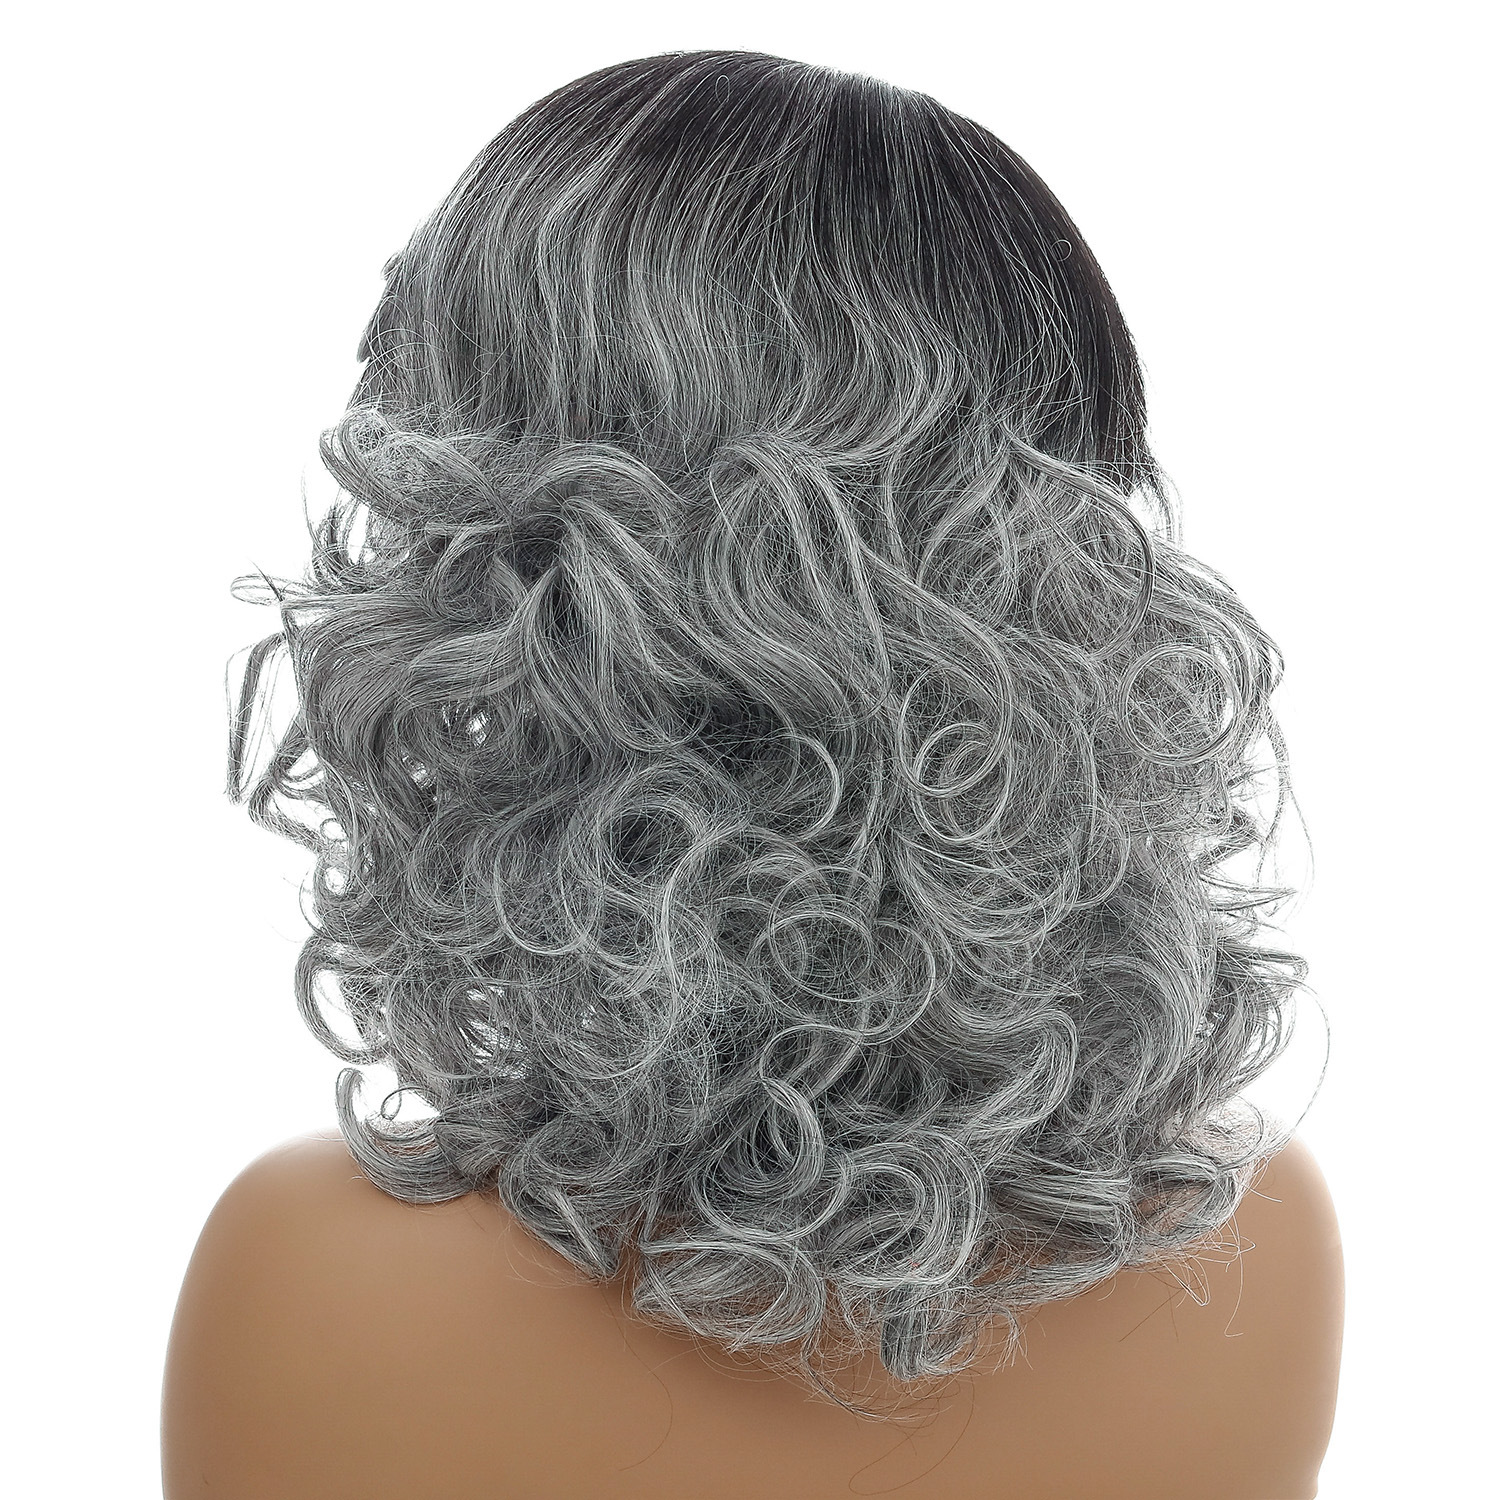 Stylish black silver synthetic wig featuring medium-length curly hair, designed for women